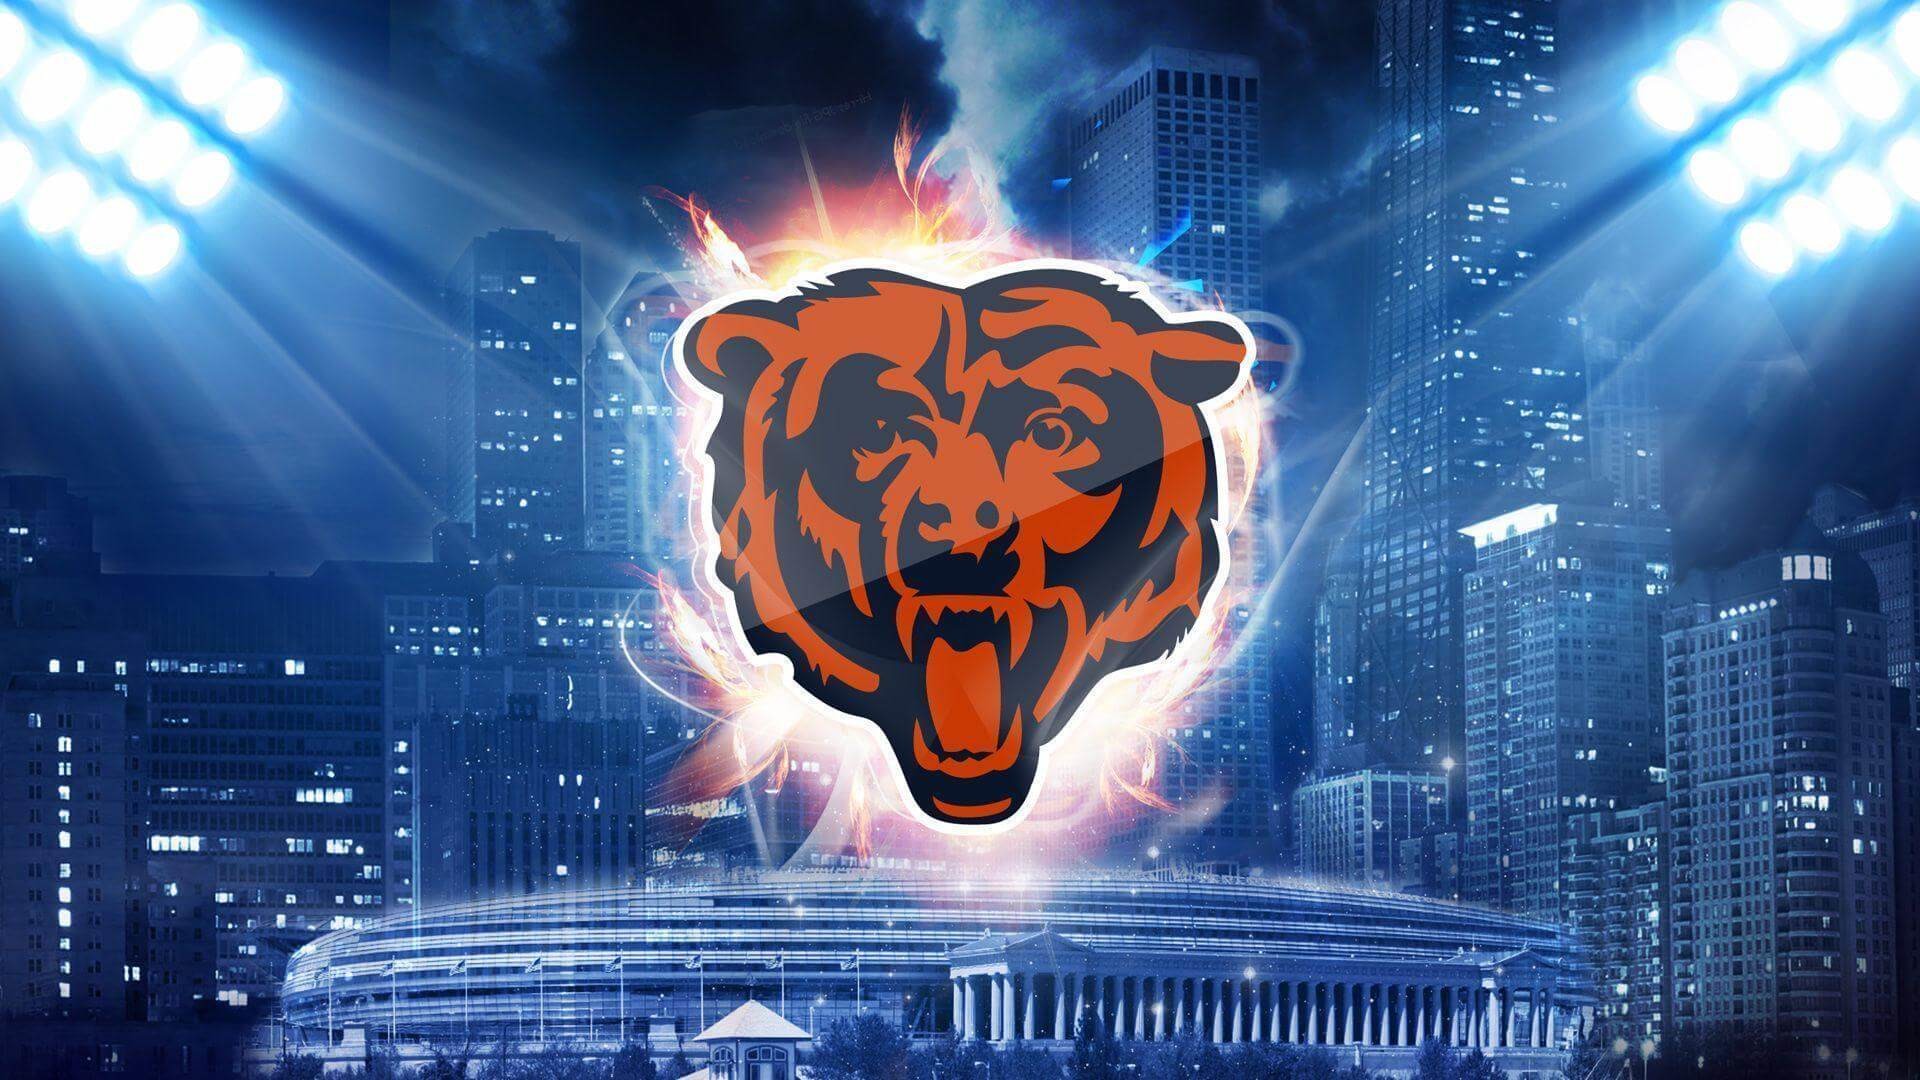 1920x1080 Chicago Bears Wallpapers For iPad